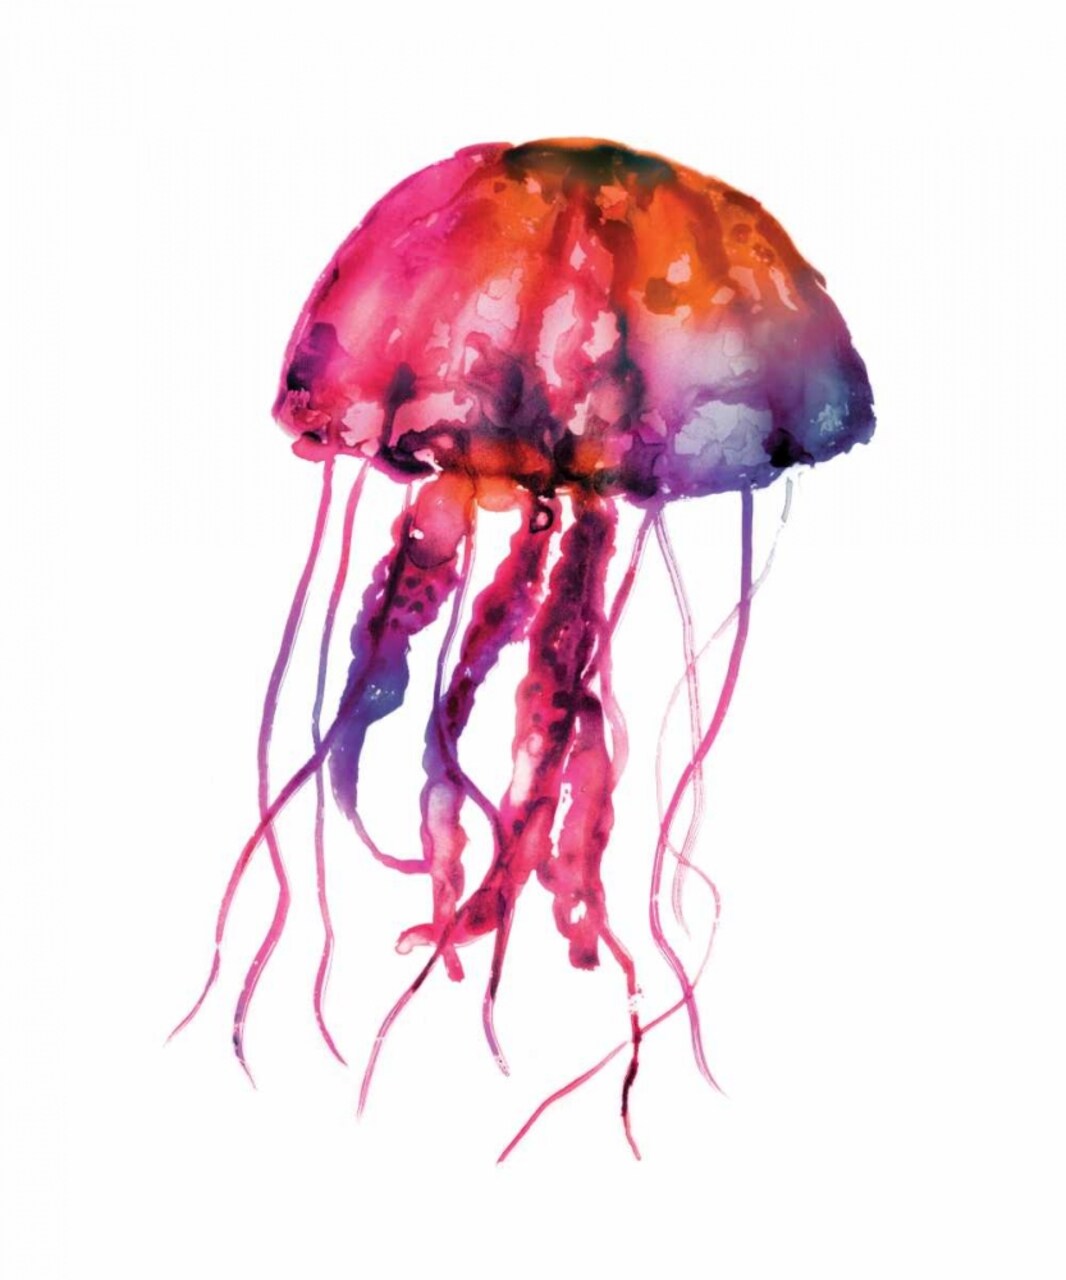 Multicolored Jellyfish Poster Print by Edward Selkirk - Item # VARPDXSE363F1